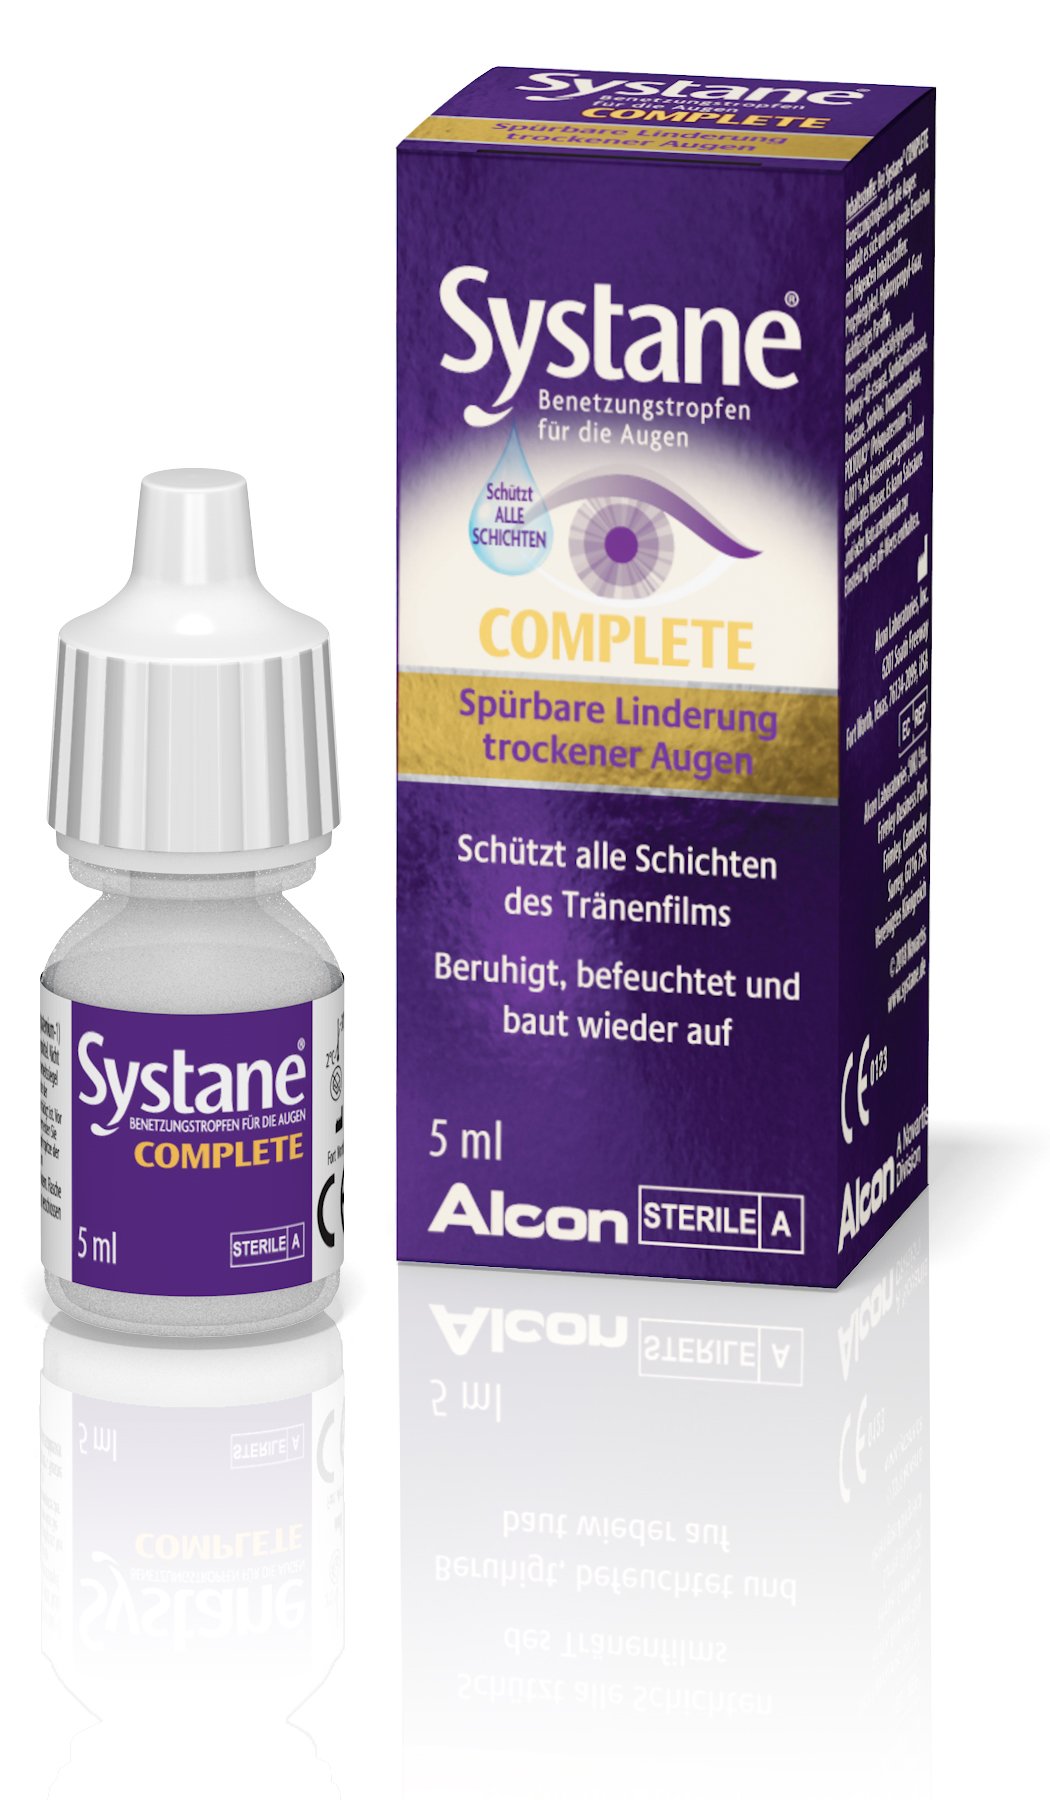 Systane COMPLETE (5ml)